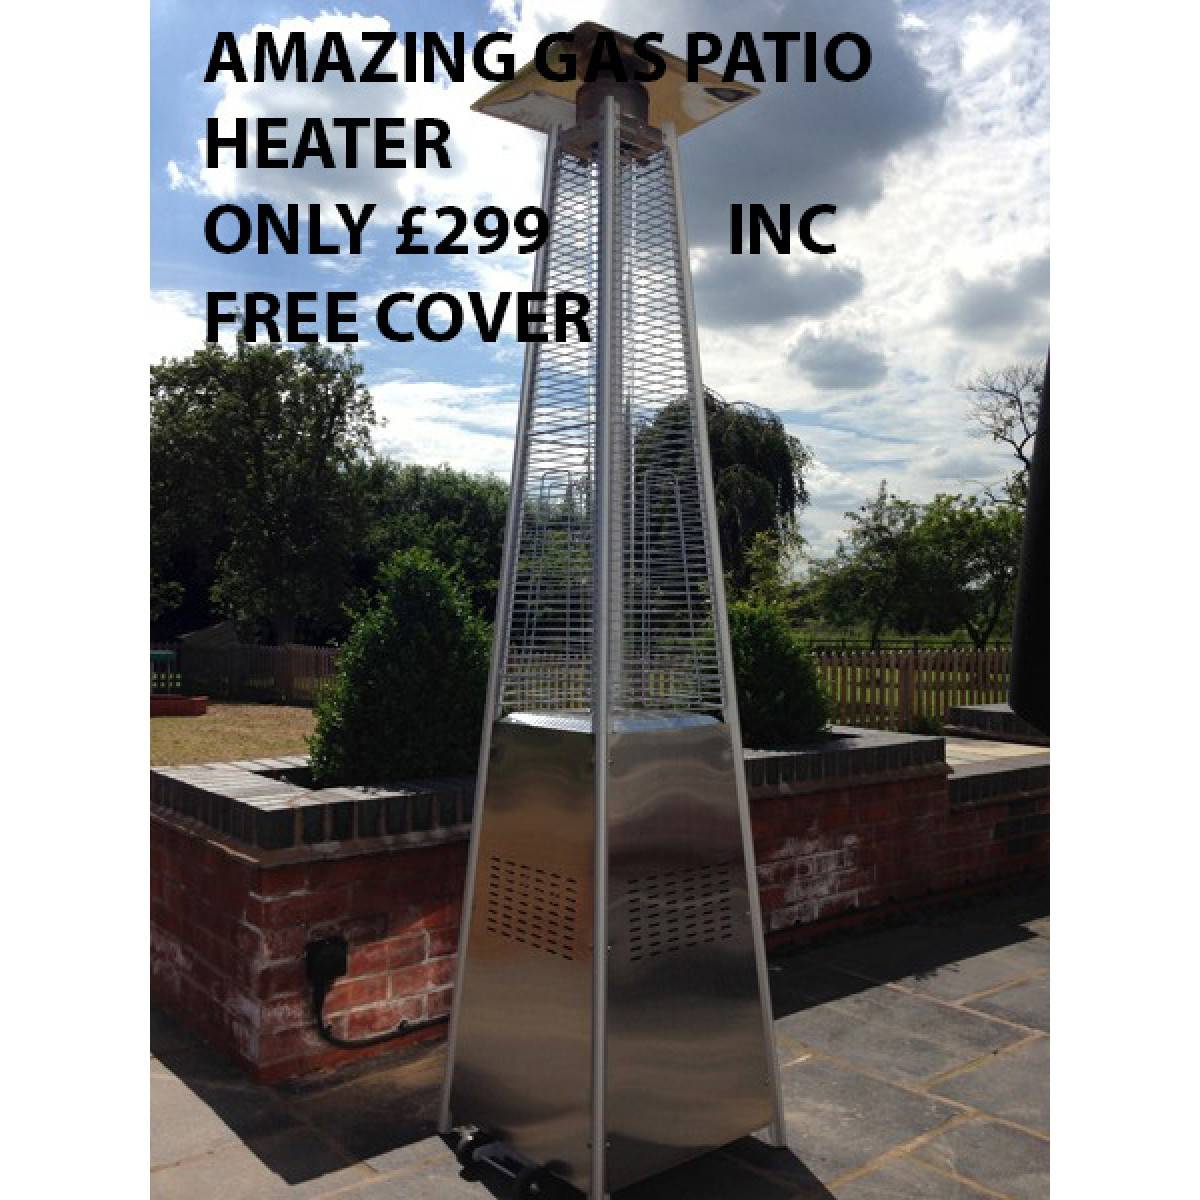 Gas Patio Heaters Banned Fireplace Heater Adorable Midlands with sizing 1200 X 1200